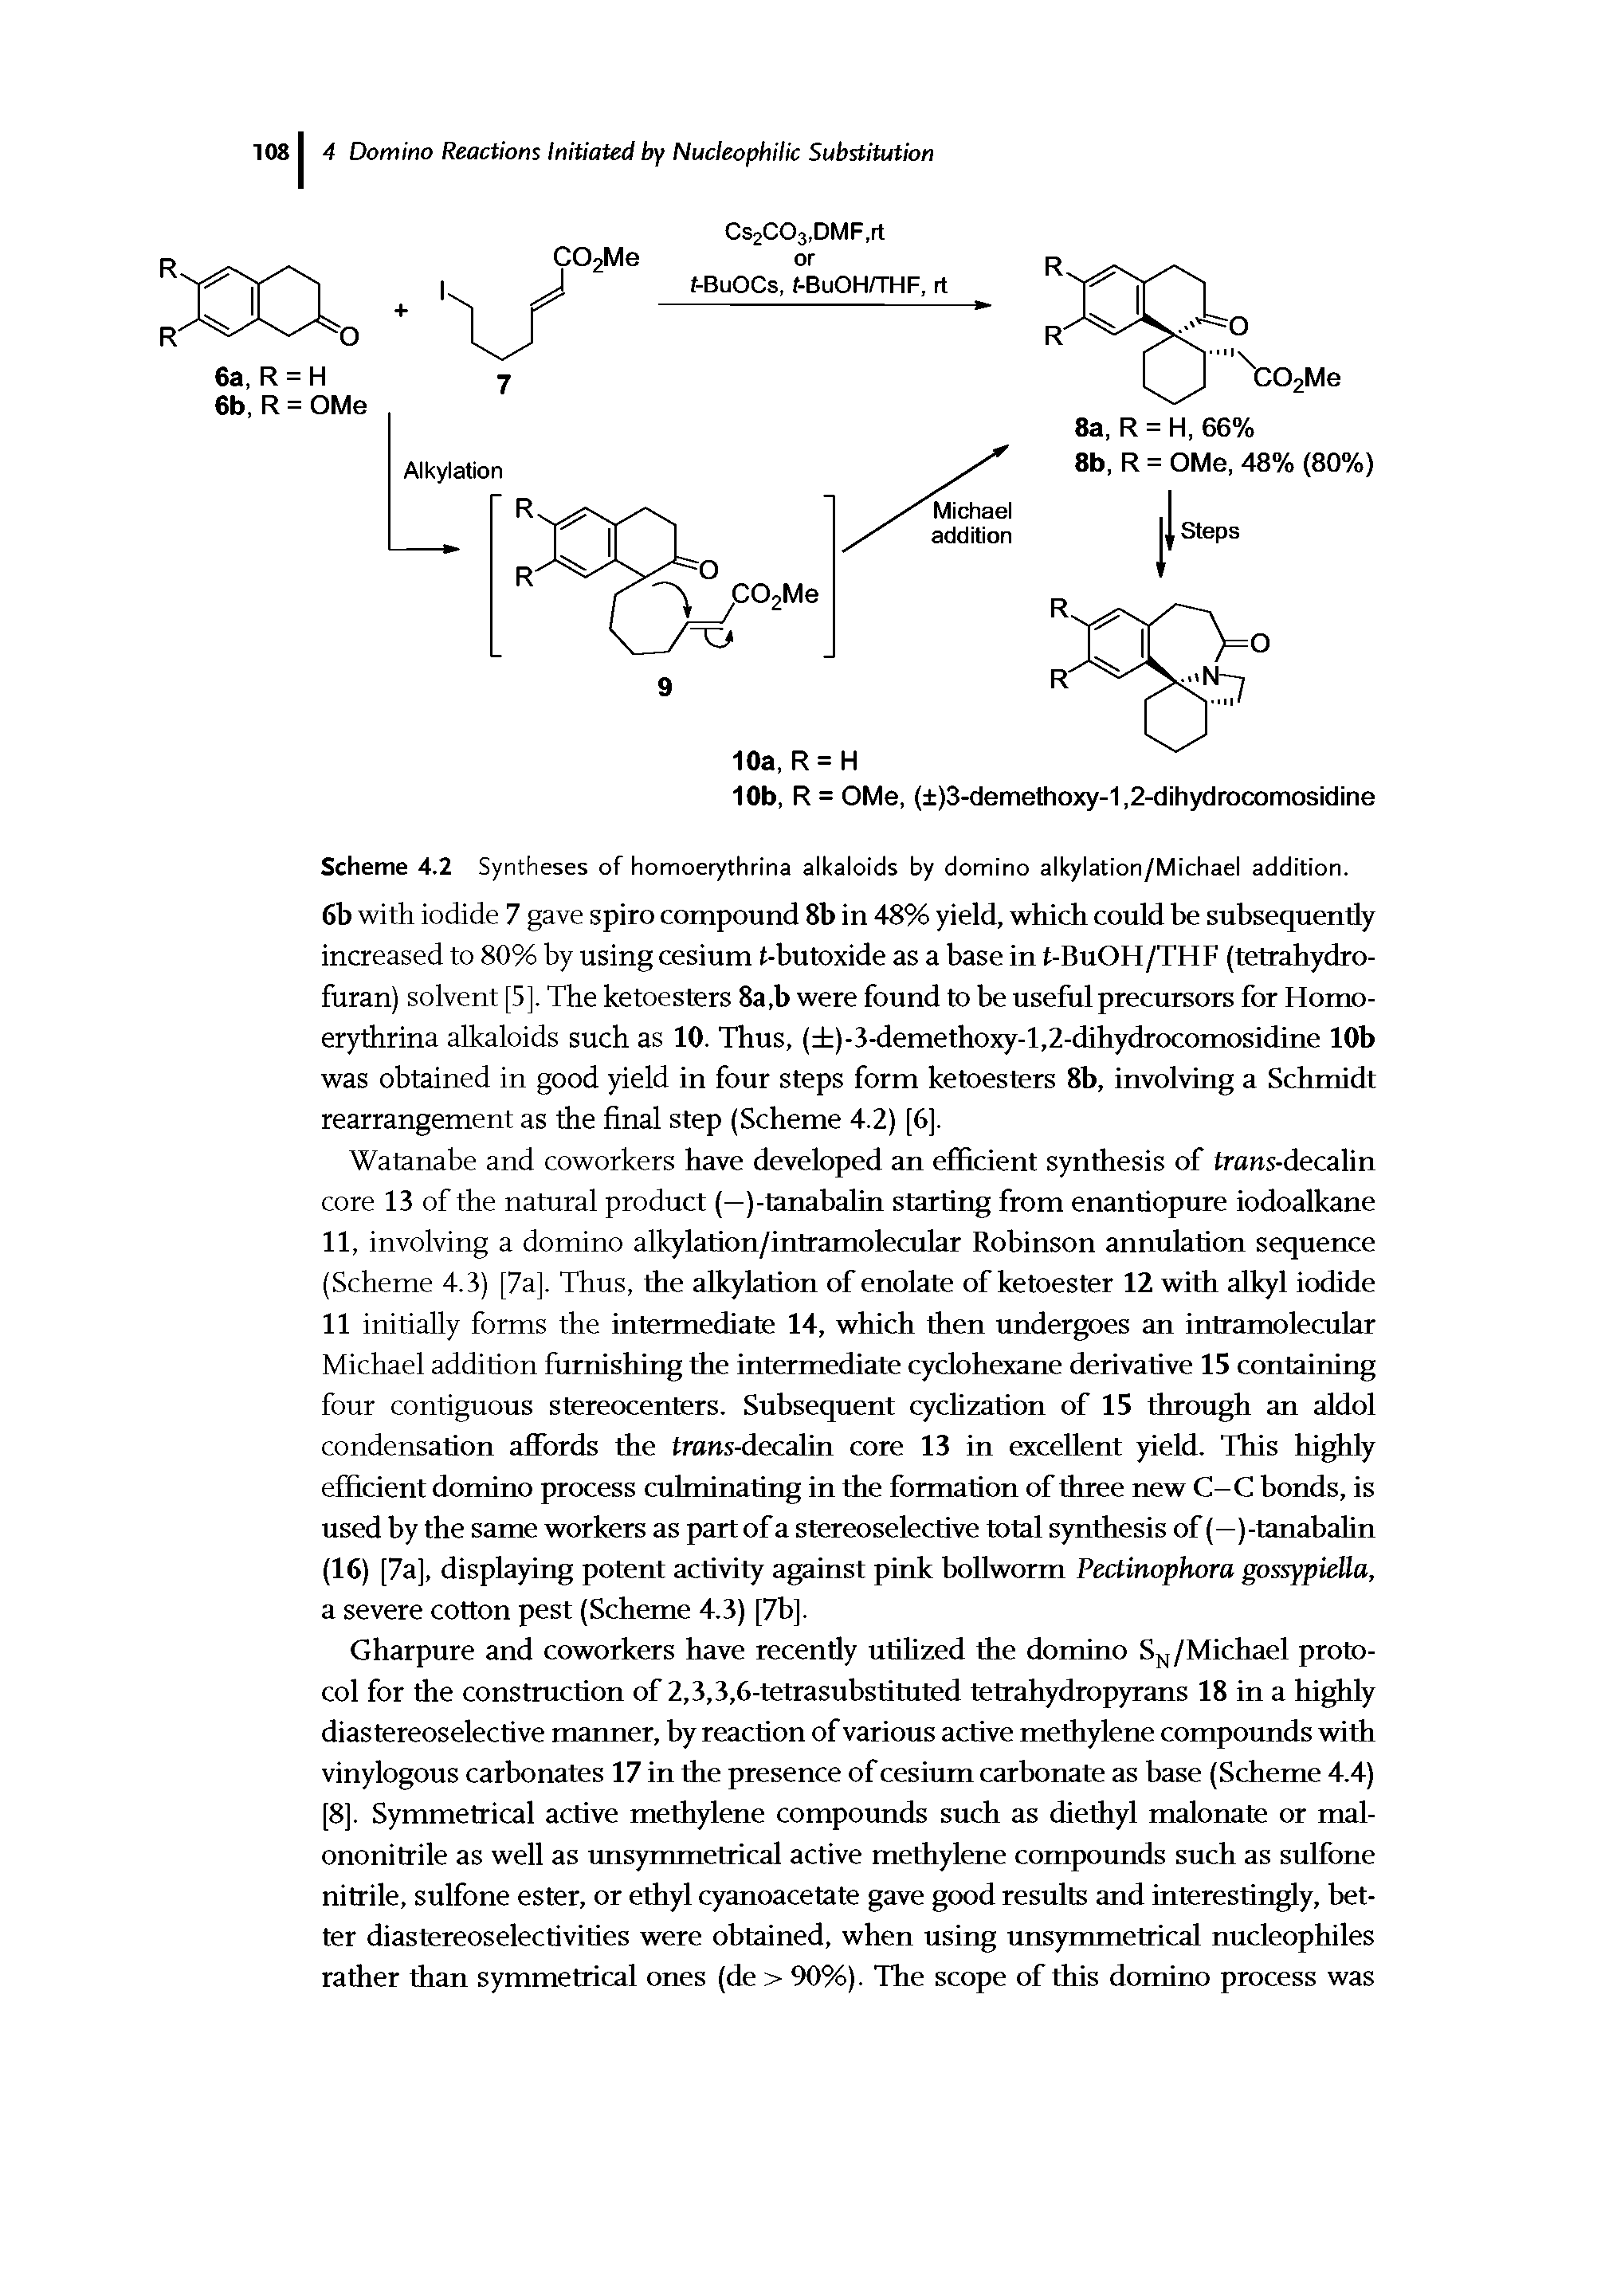 Scheme 4.2 Syntheses of homoerythrina alkaloids by domino alkylation/Michael addition. 6b with iodide 7 gave spiro compound 8b in 48% yield, which could be subsequently increased to 80% by using cesium t-butoxide as a base in t-BuOH/THF (tetrahydro-furan) solvent [5]. The ketoesters 8a,b were found to be useful precursors for Homoerythrina alkaloids such as 10. Thus, ( )-3-demethoxy-l,2-dihydrocomosidine 10b was obtained in good yield in four steps form ketoesters 8b, involving a Schmidt rearrangement as the final step (Scheme 4.2) [6].